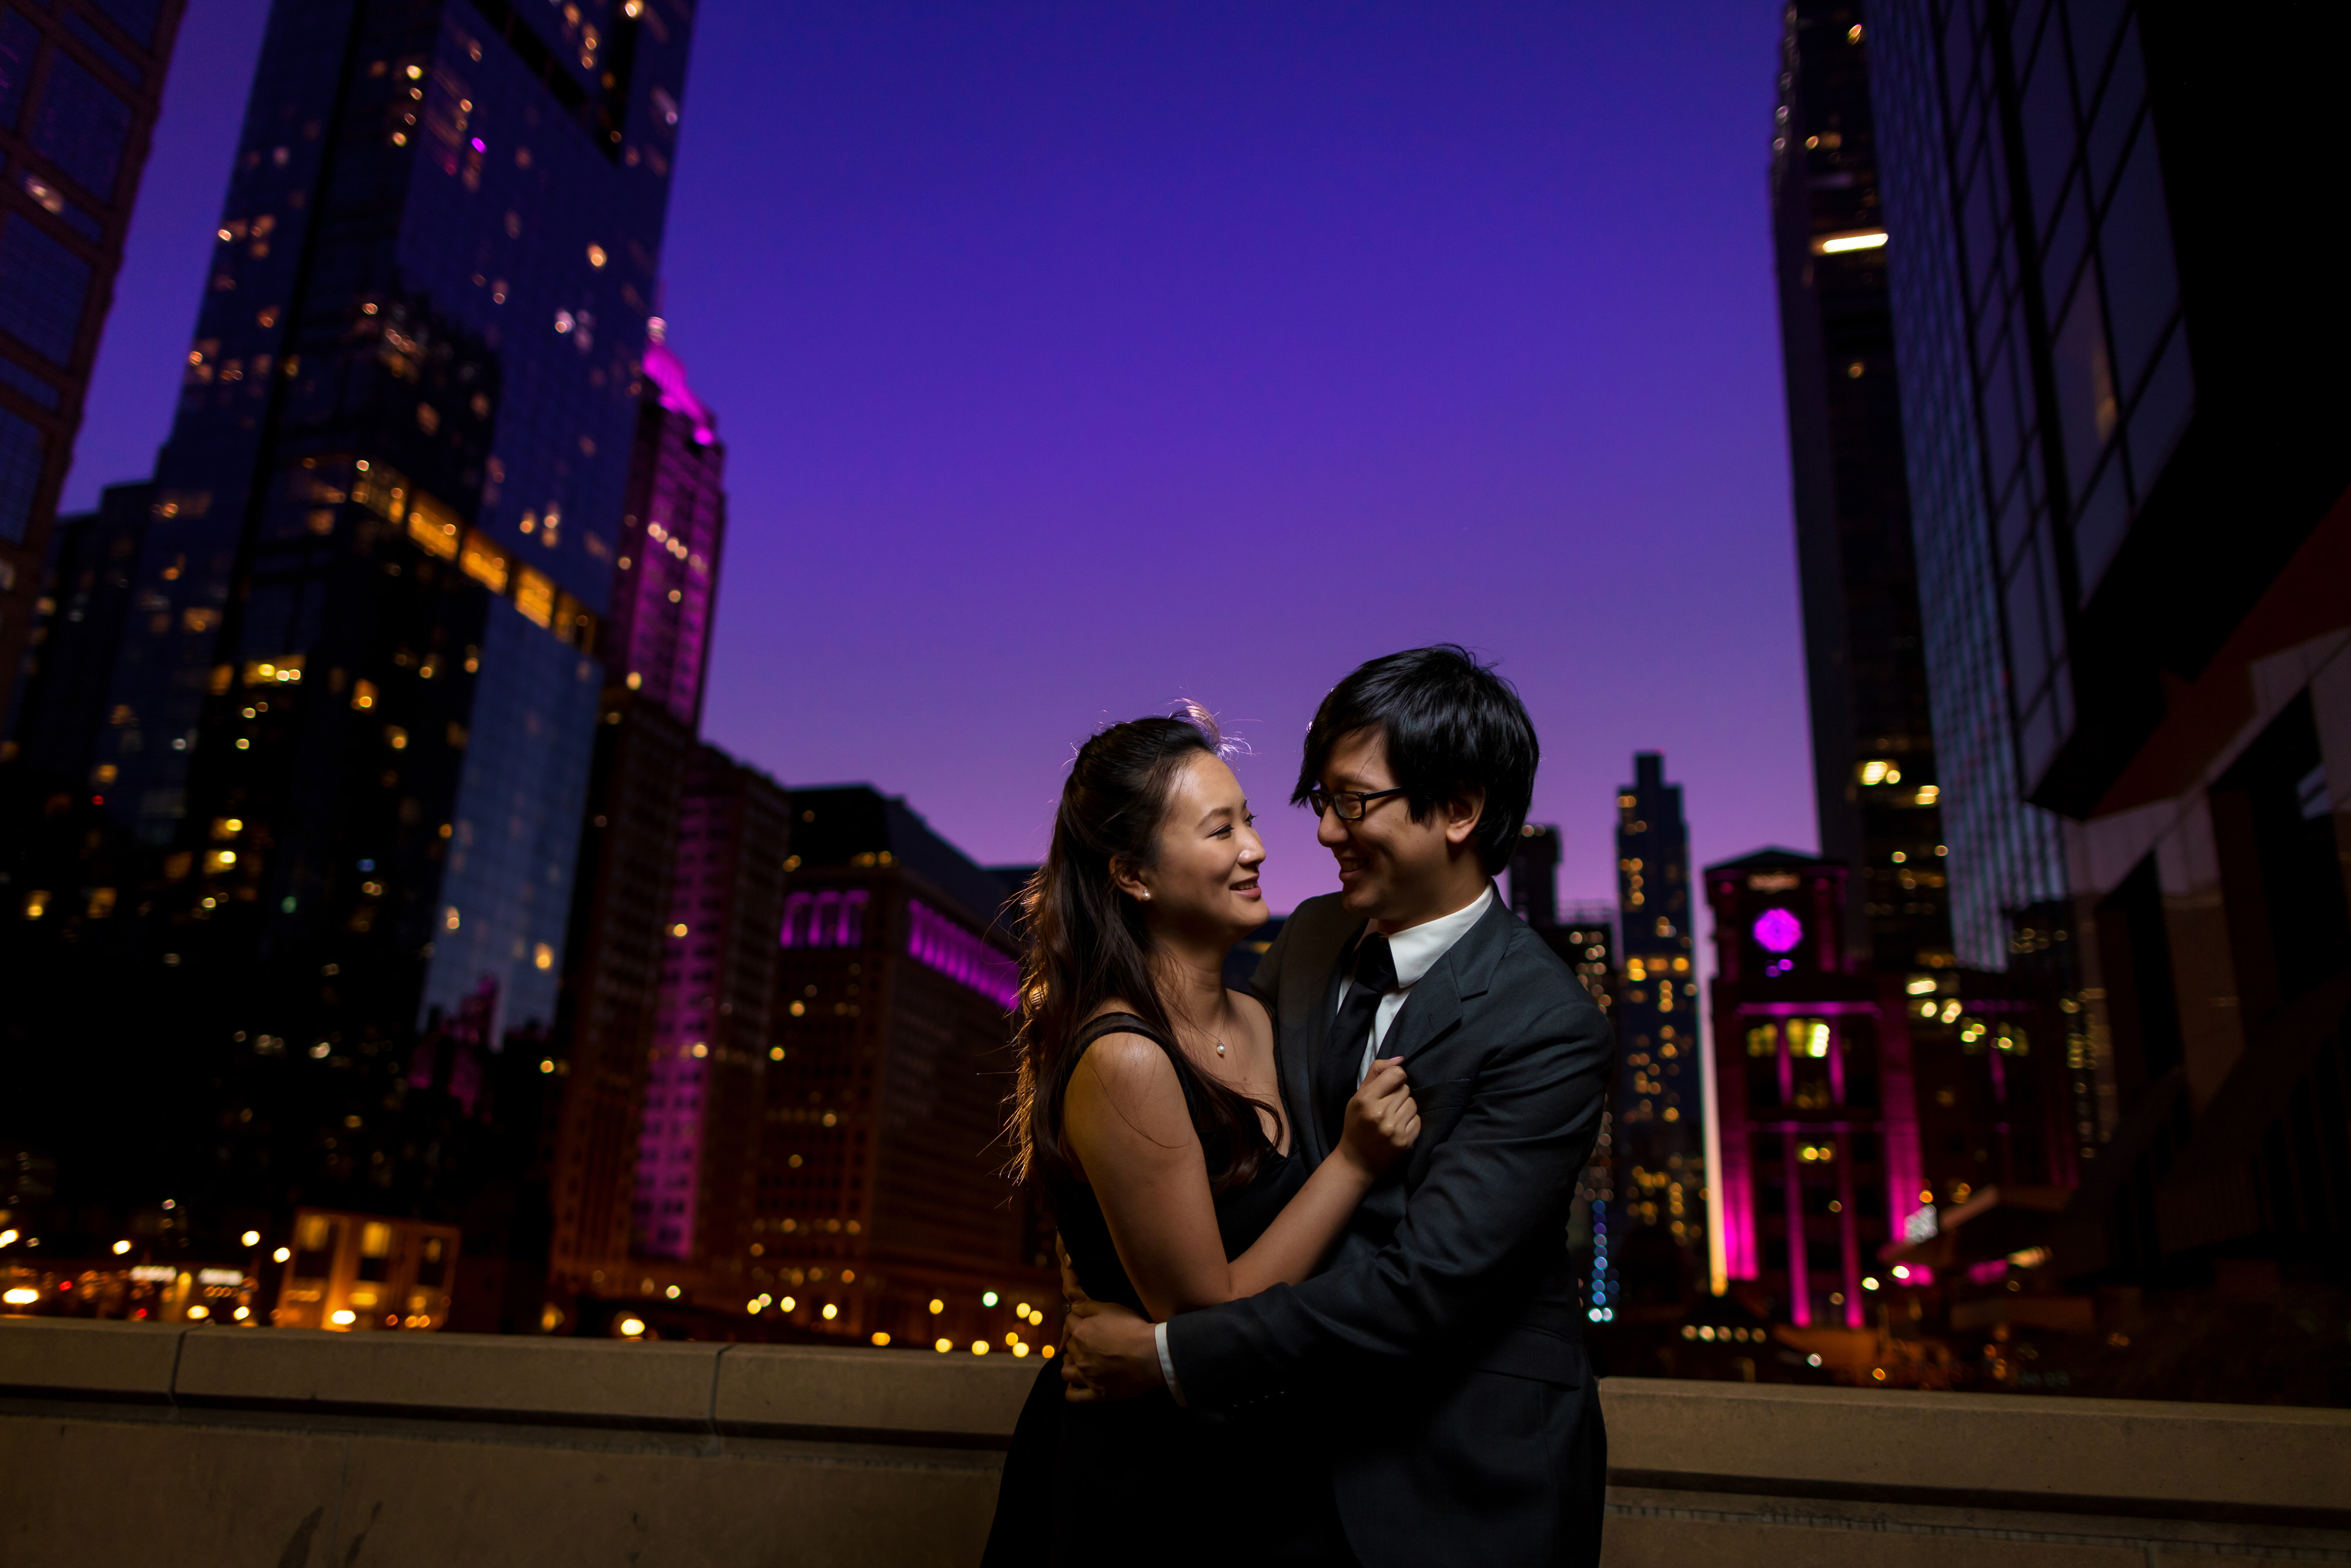 Couple poses for engagement photos at twilight in downtown Chicago with purple sky and buildings lit up